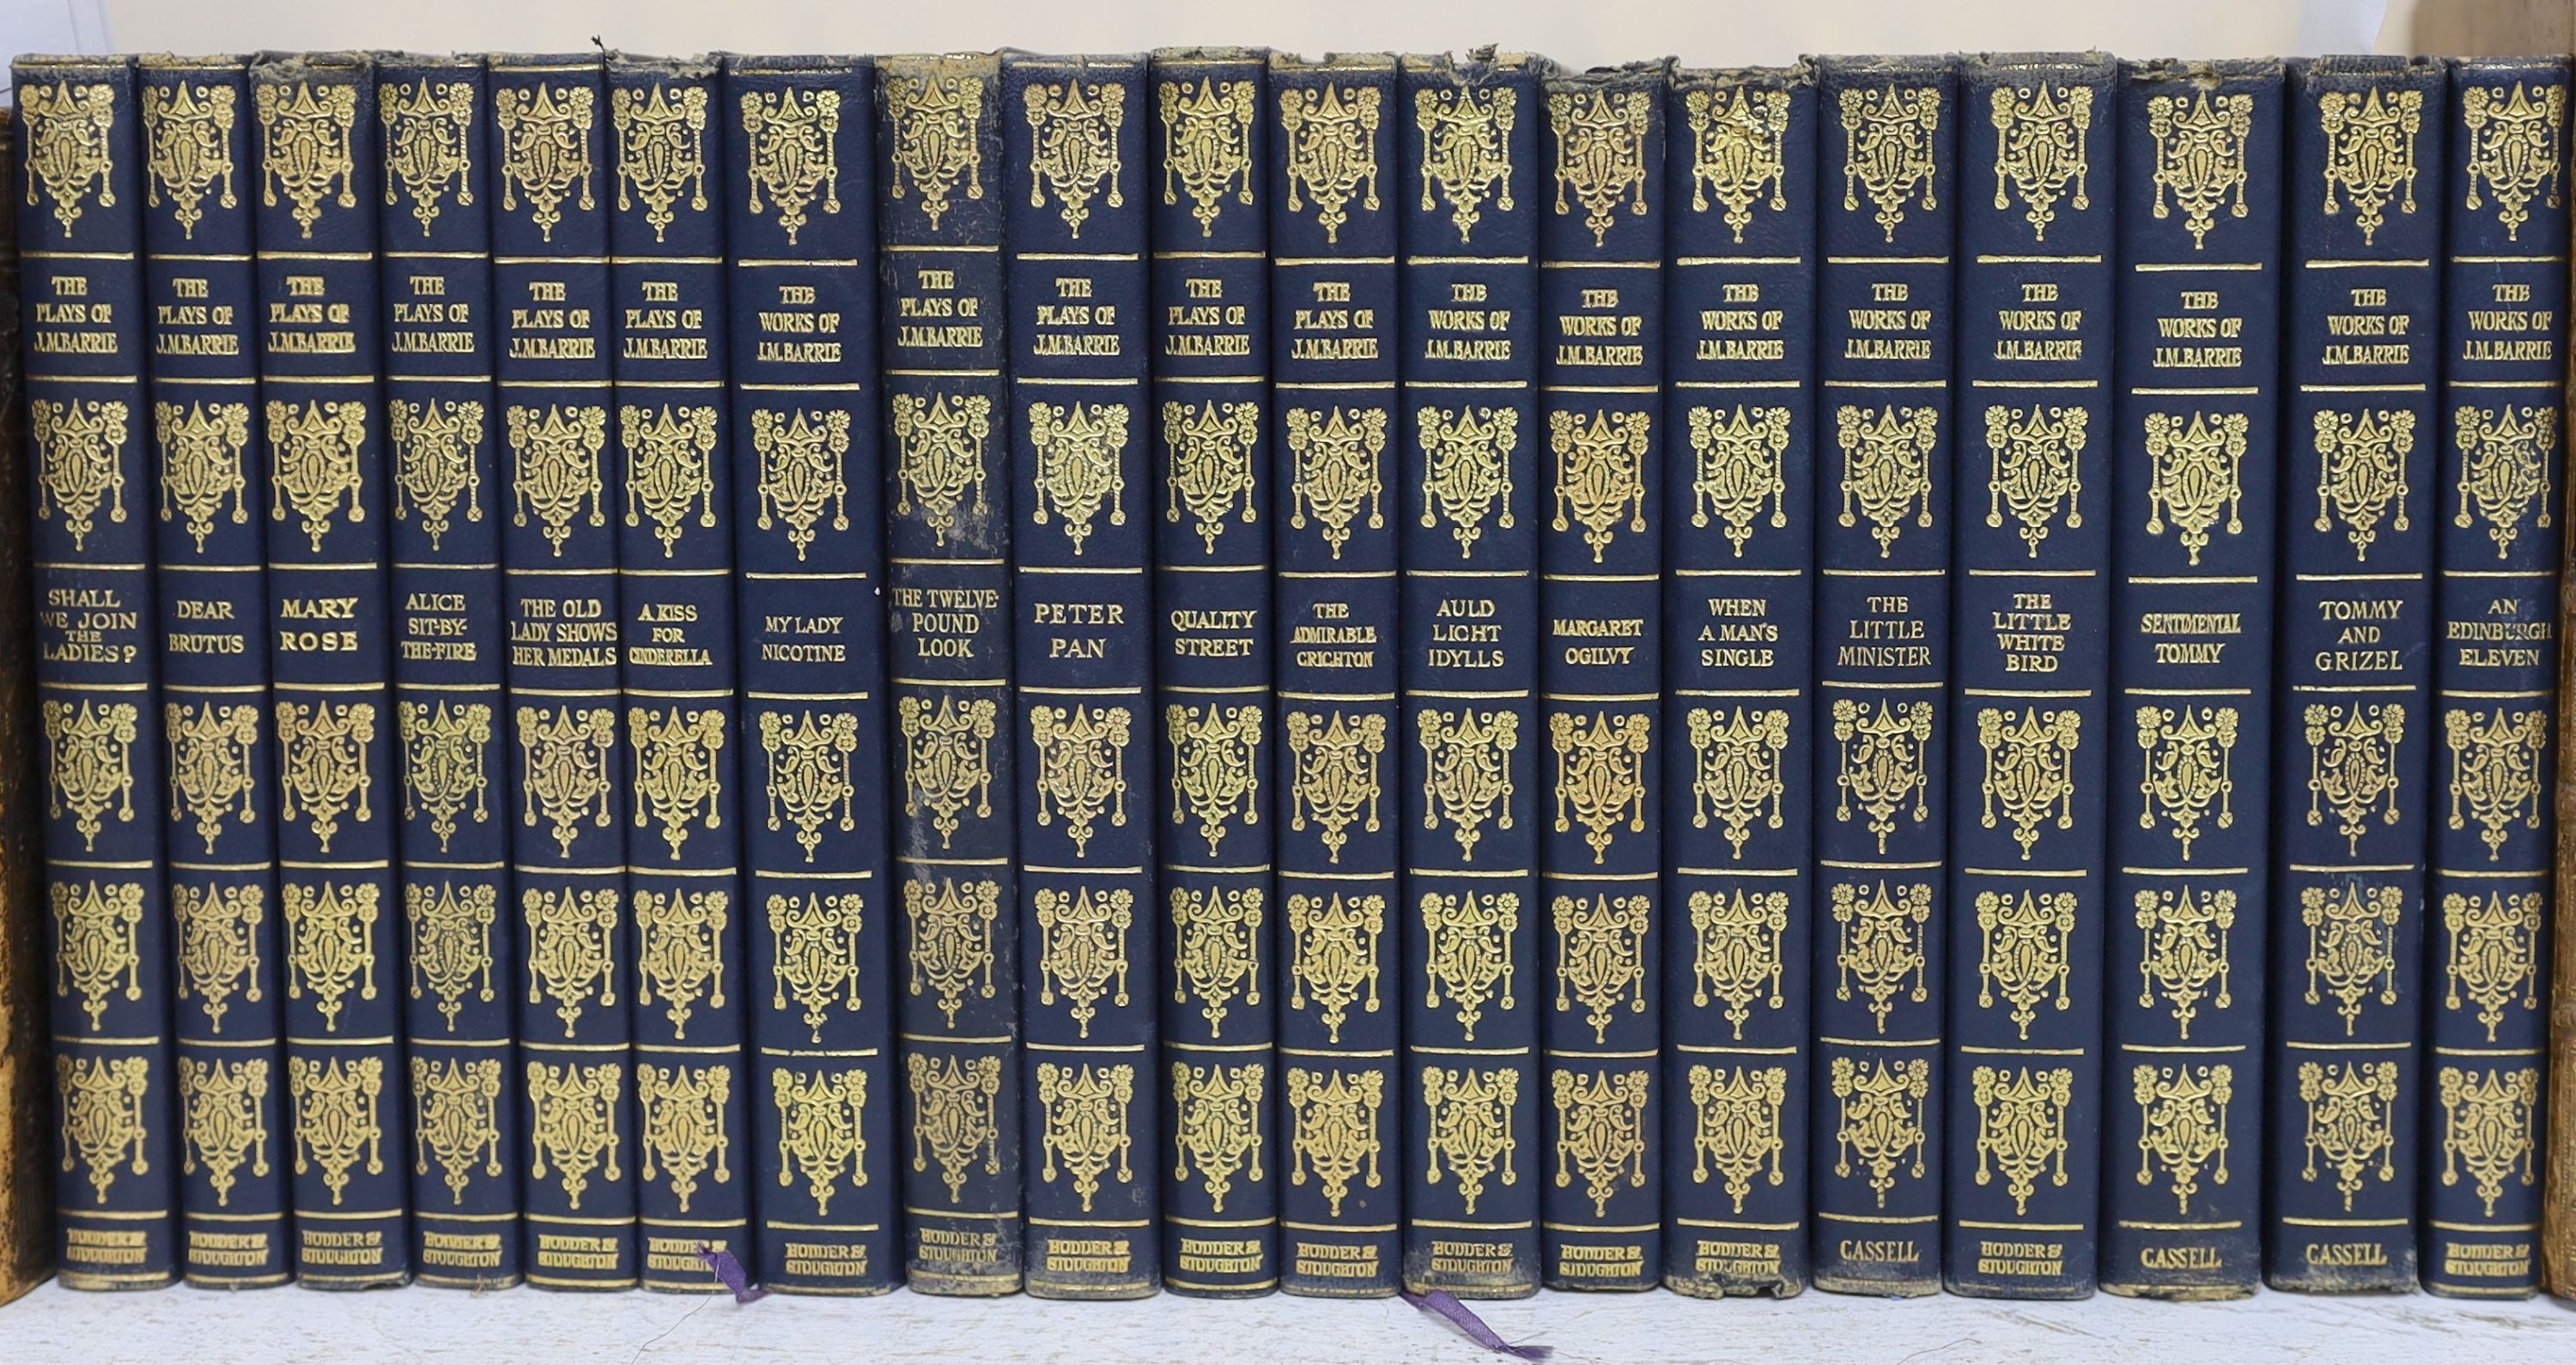 Barrie, J.M - The Plays (10 vols) and The Works (9 vols), uniformly bound in blue leatherette, with gilt lettered and decorated spines, Cassell & Company Ltd; London, 1928-30 (19 vols)